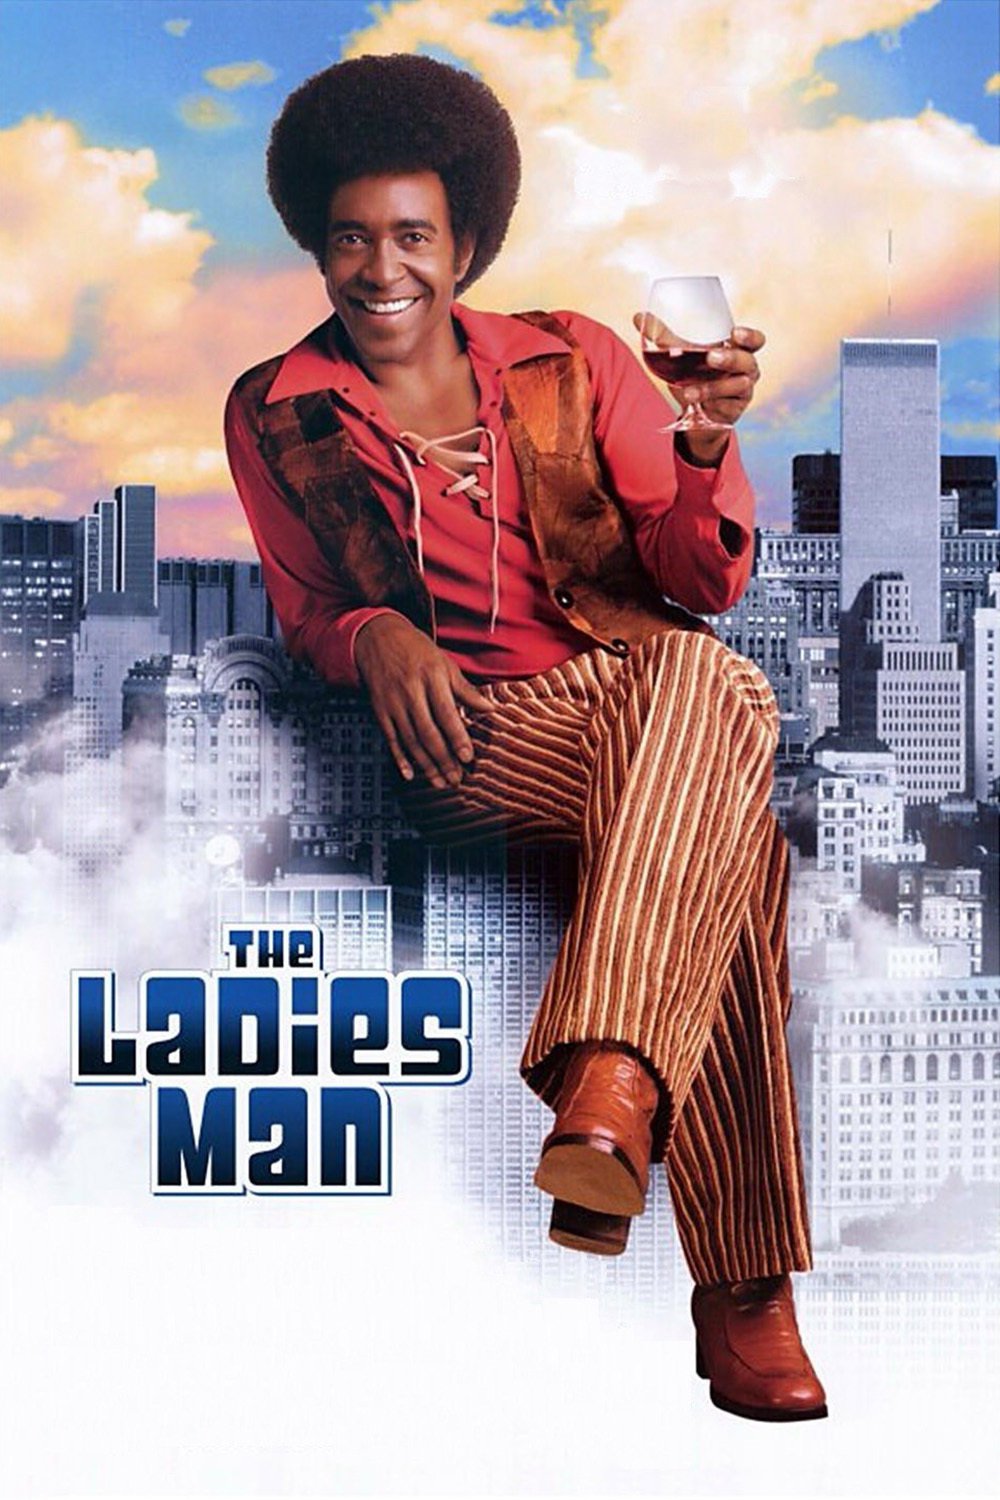 Poster for the movie "The Ladies Man"